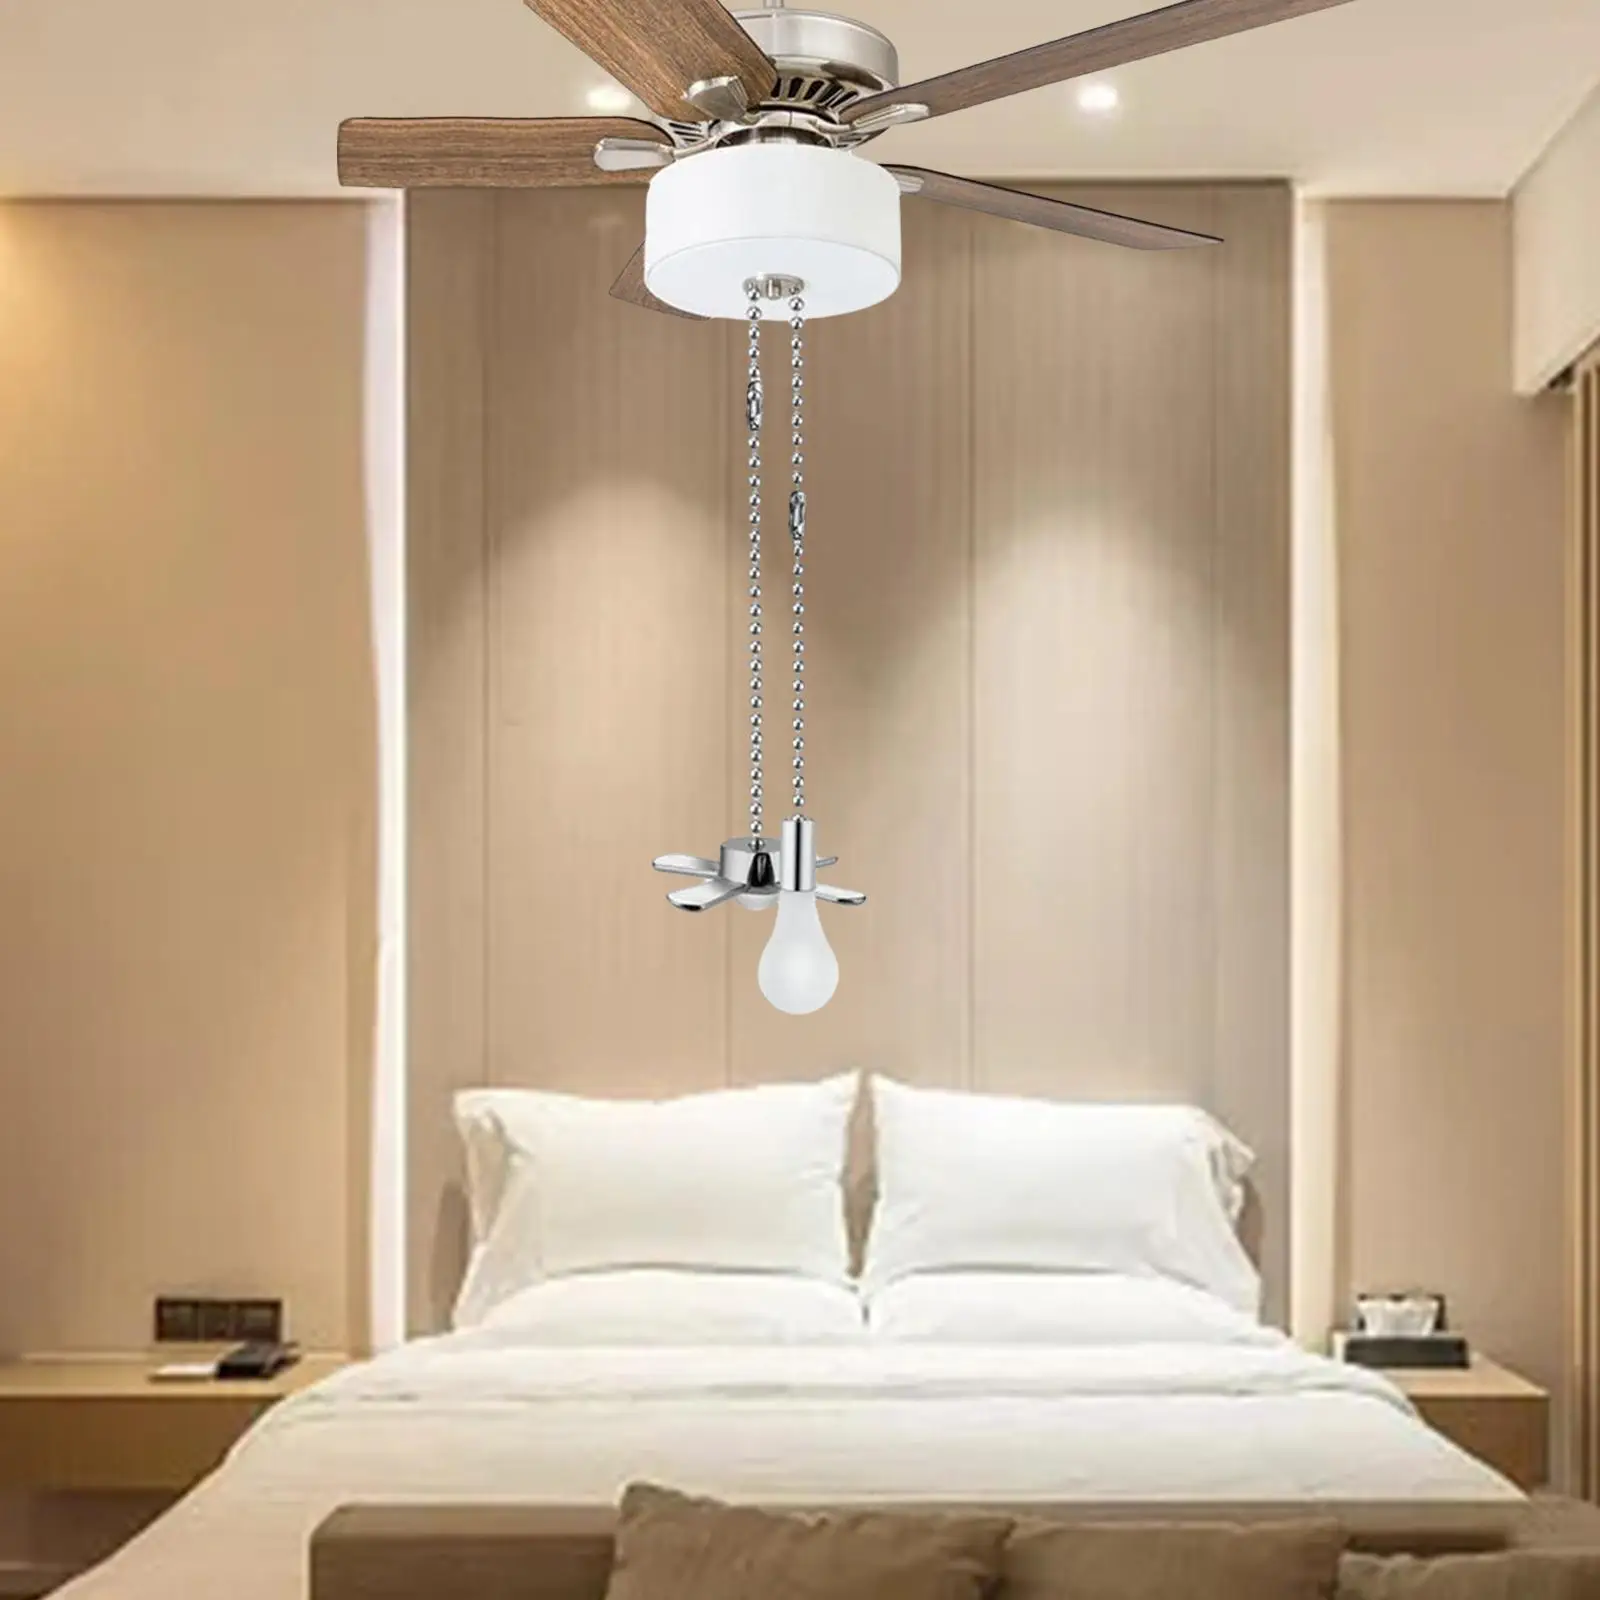 Metal Ceiling Fan Pull Chains Stylish Lamp Chain Decorative Extender Zipper